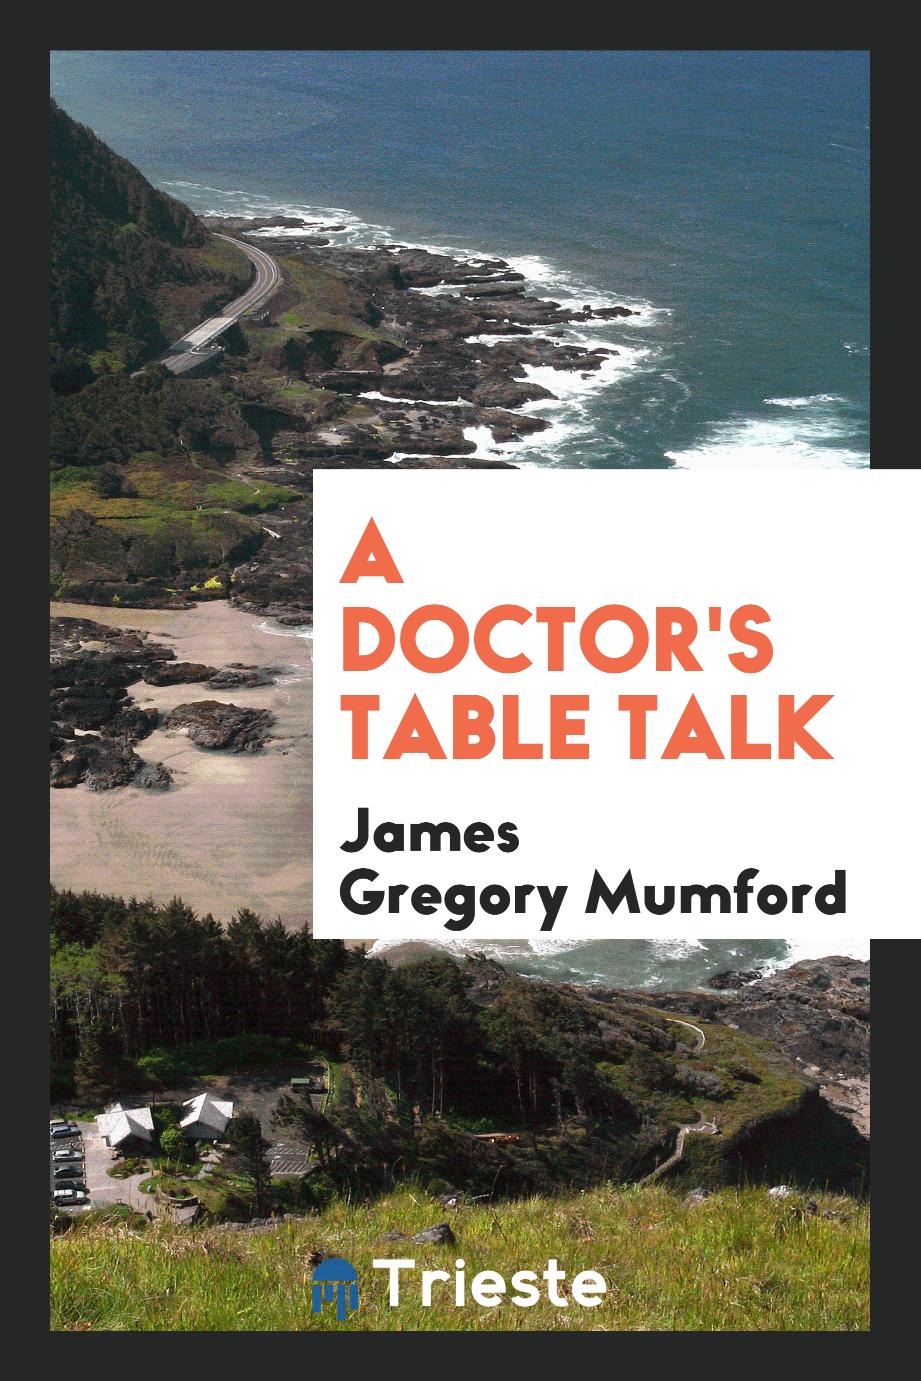 A Doctor's Table Talk